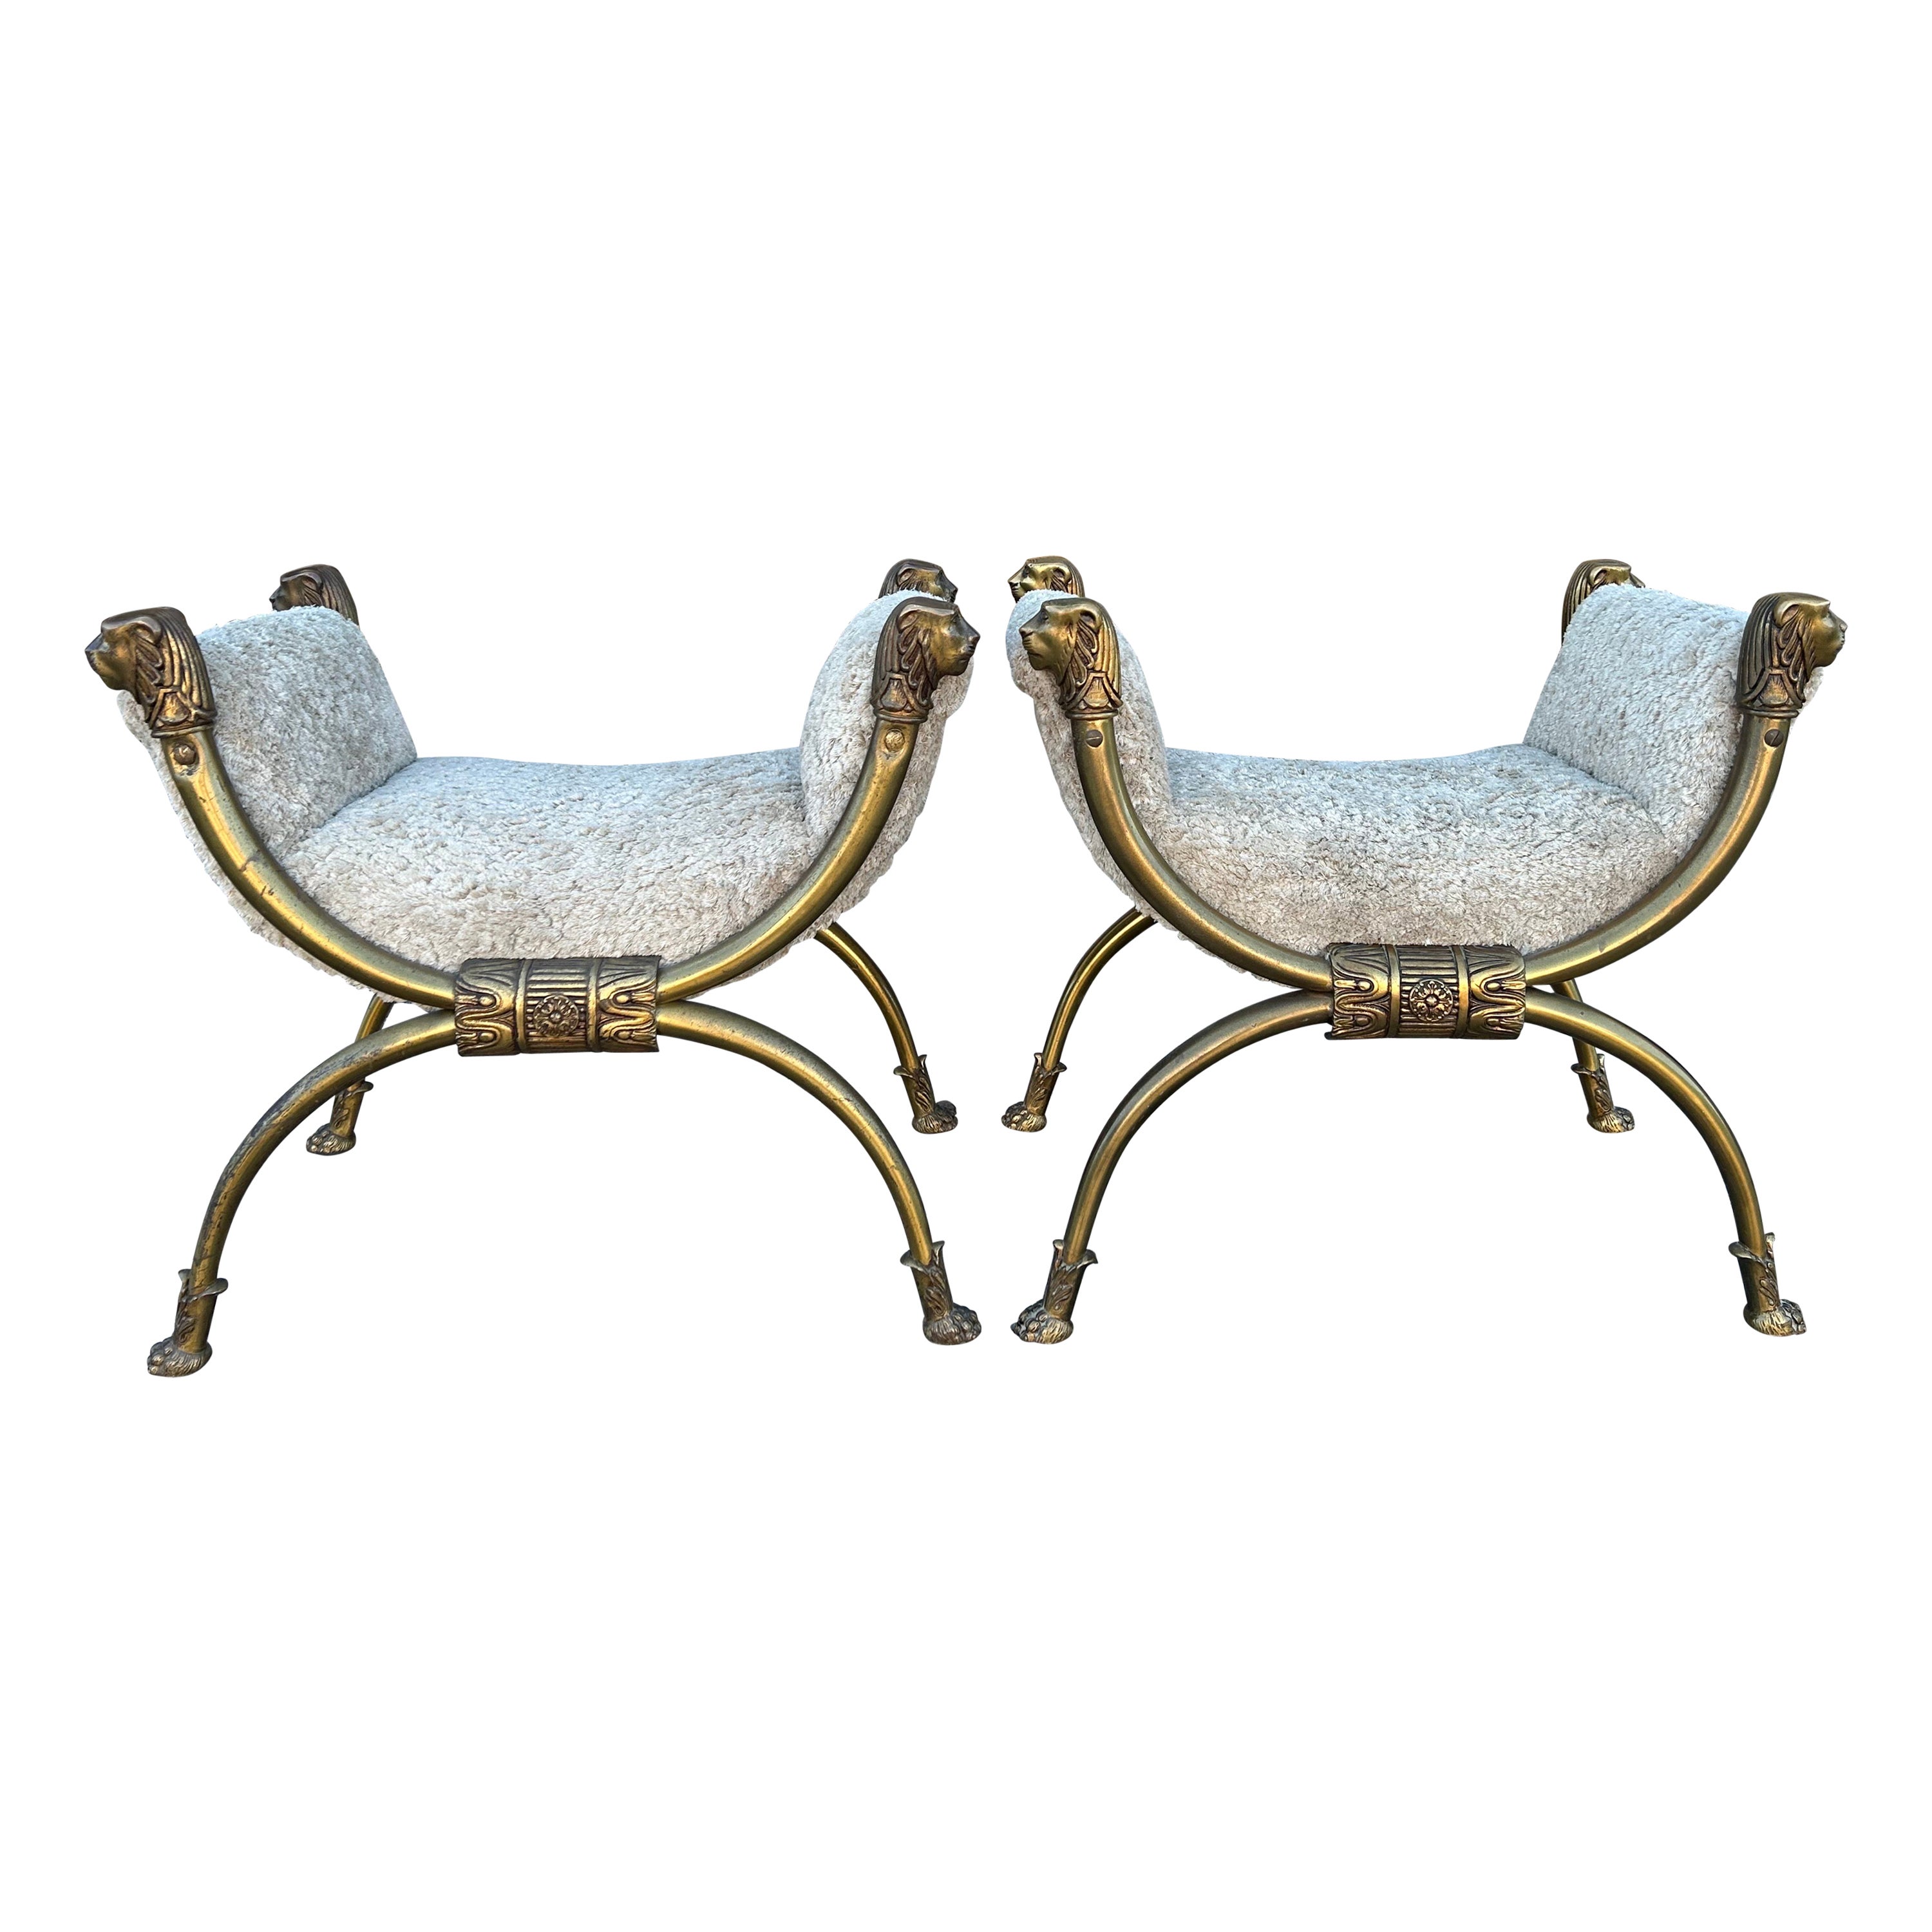 Pair Of Italian Brass Curule Benches With Lions Heads For Sale